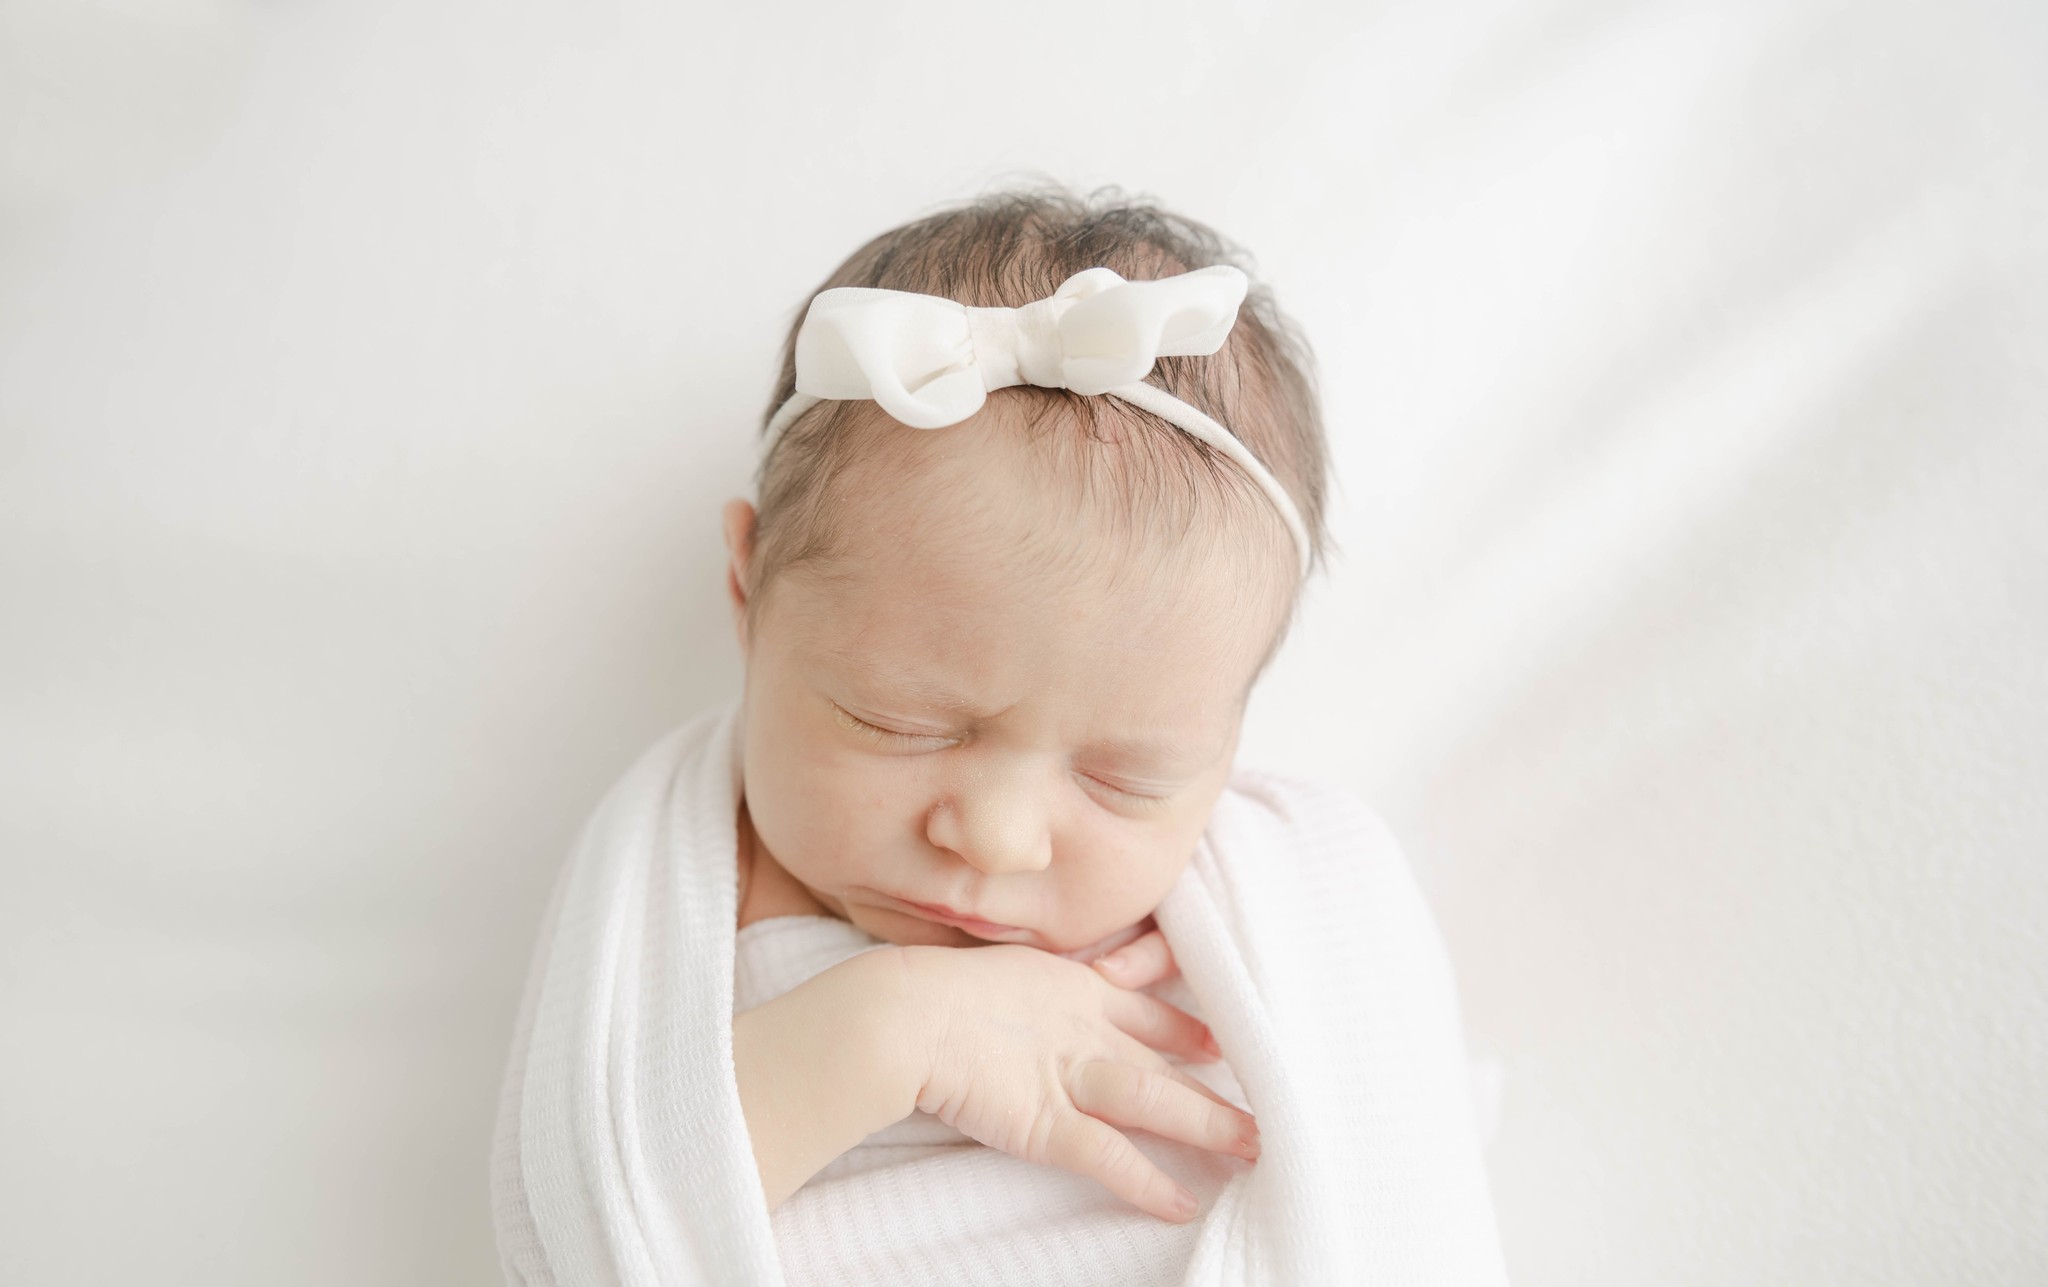 Details of a sleeping newborn baby girl in a white swaddle and bow